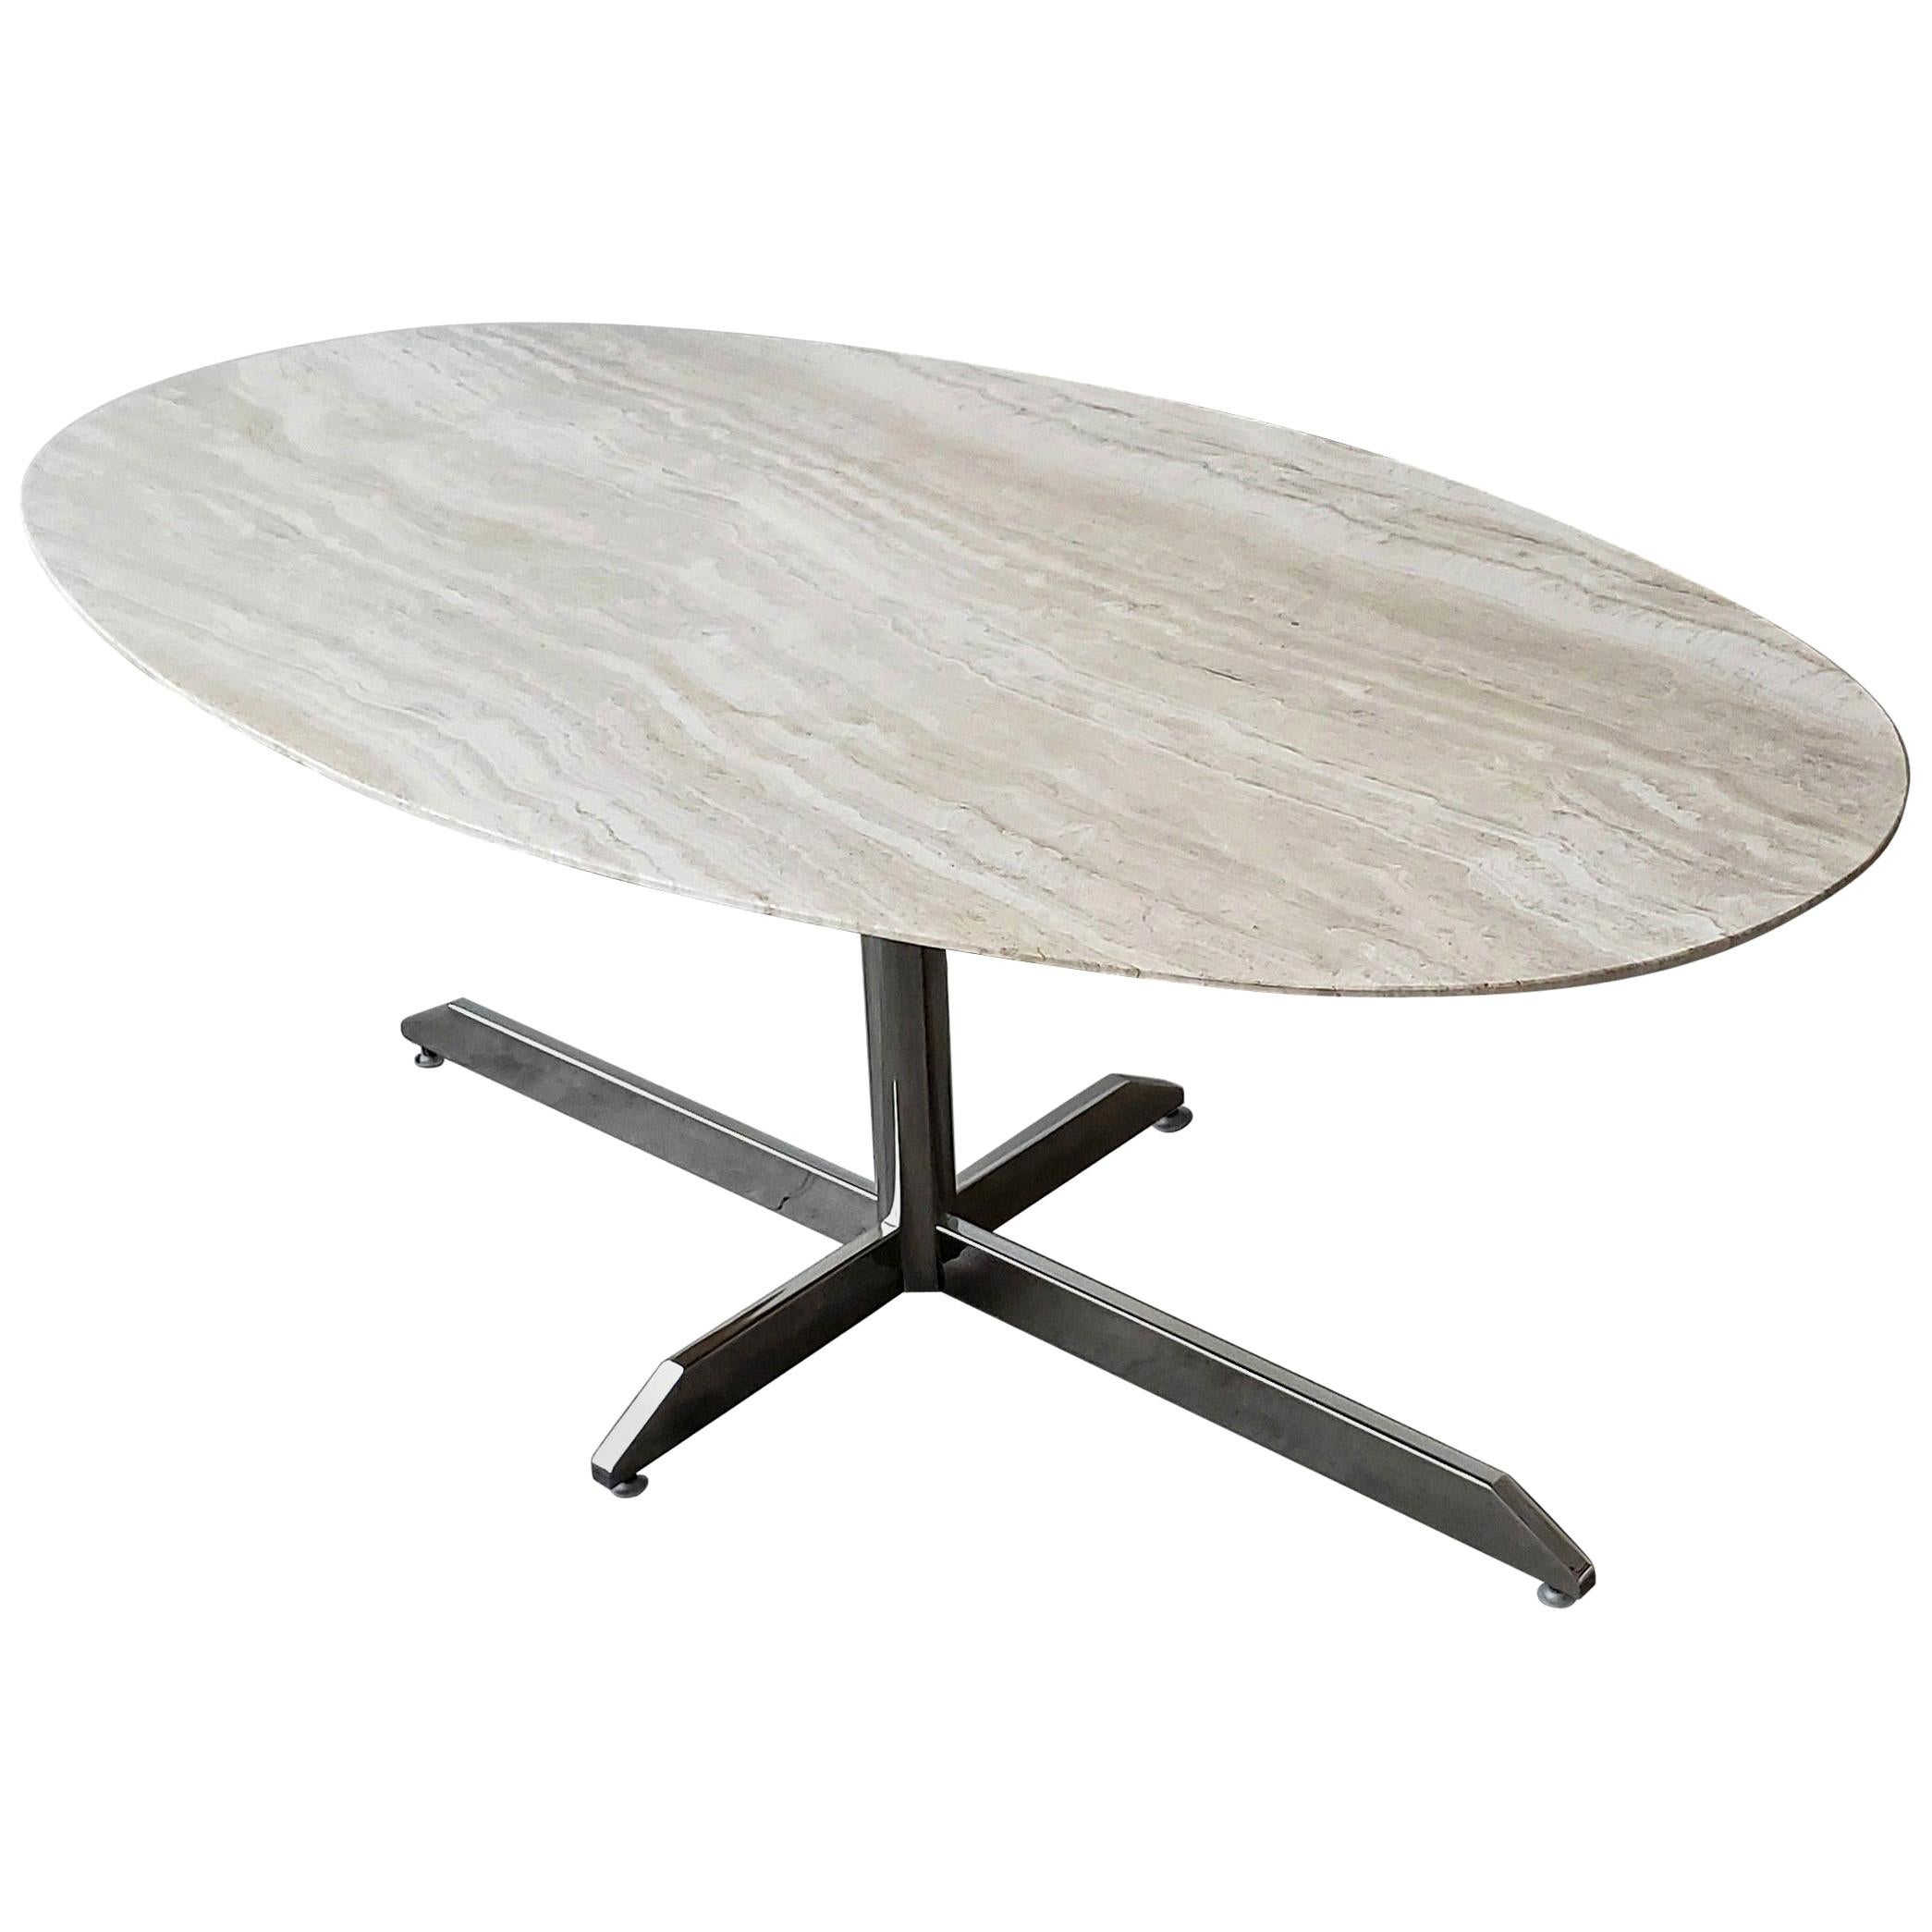 Oval Travertine and Chrome Dining Table by Florence Knoll for Roche Bobois